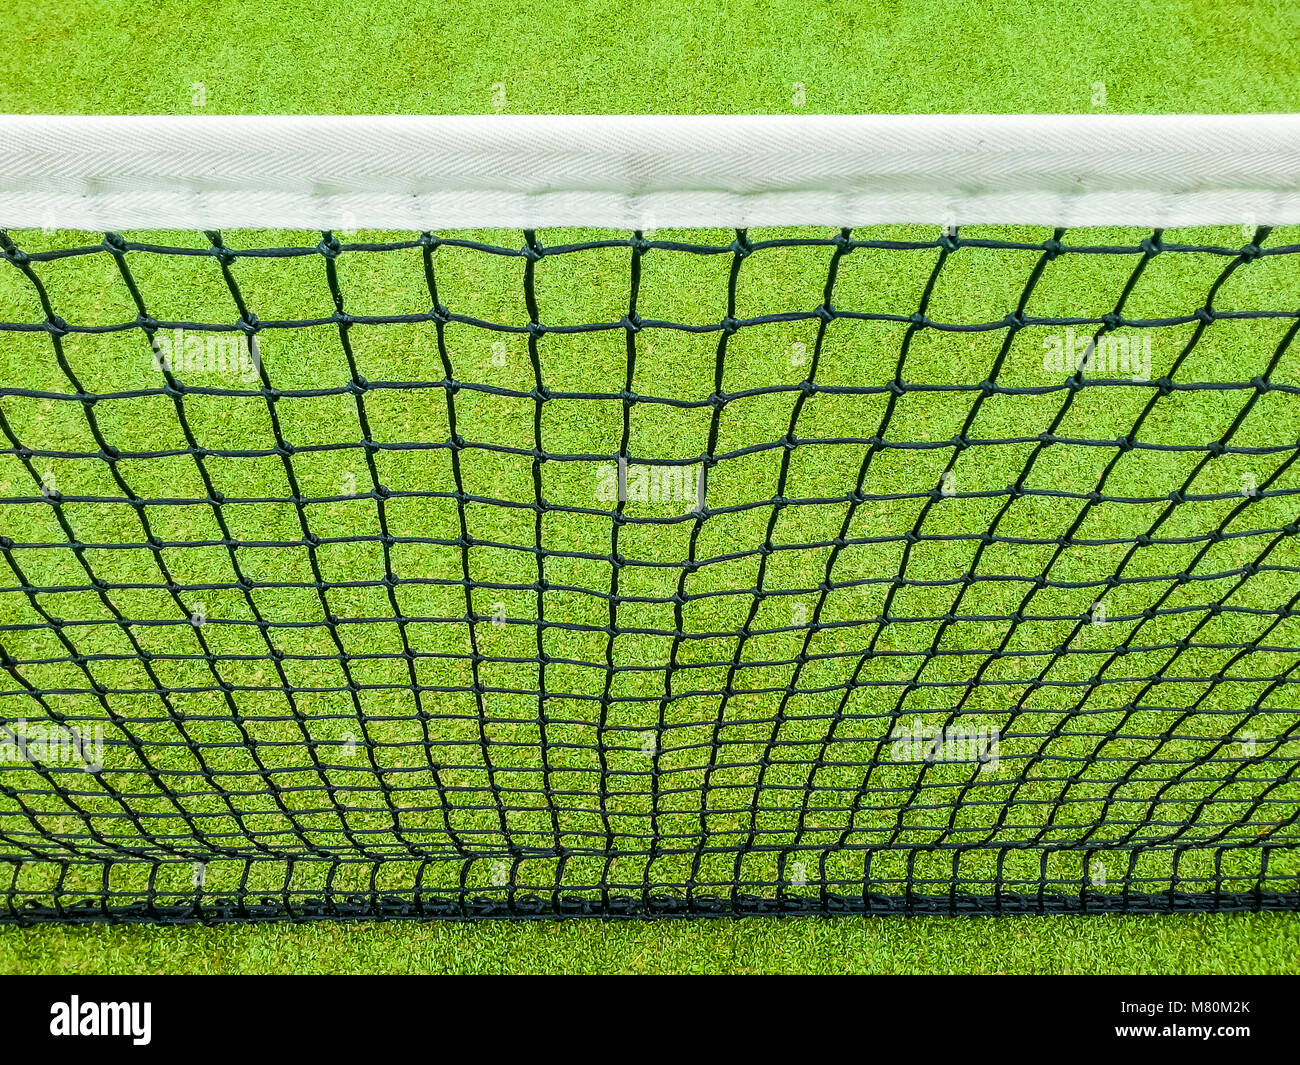 High angle view of net and green artificial turf abstract sport tennis playing field background Stock Photo